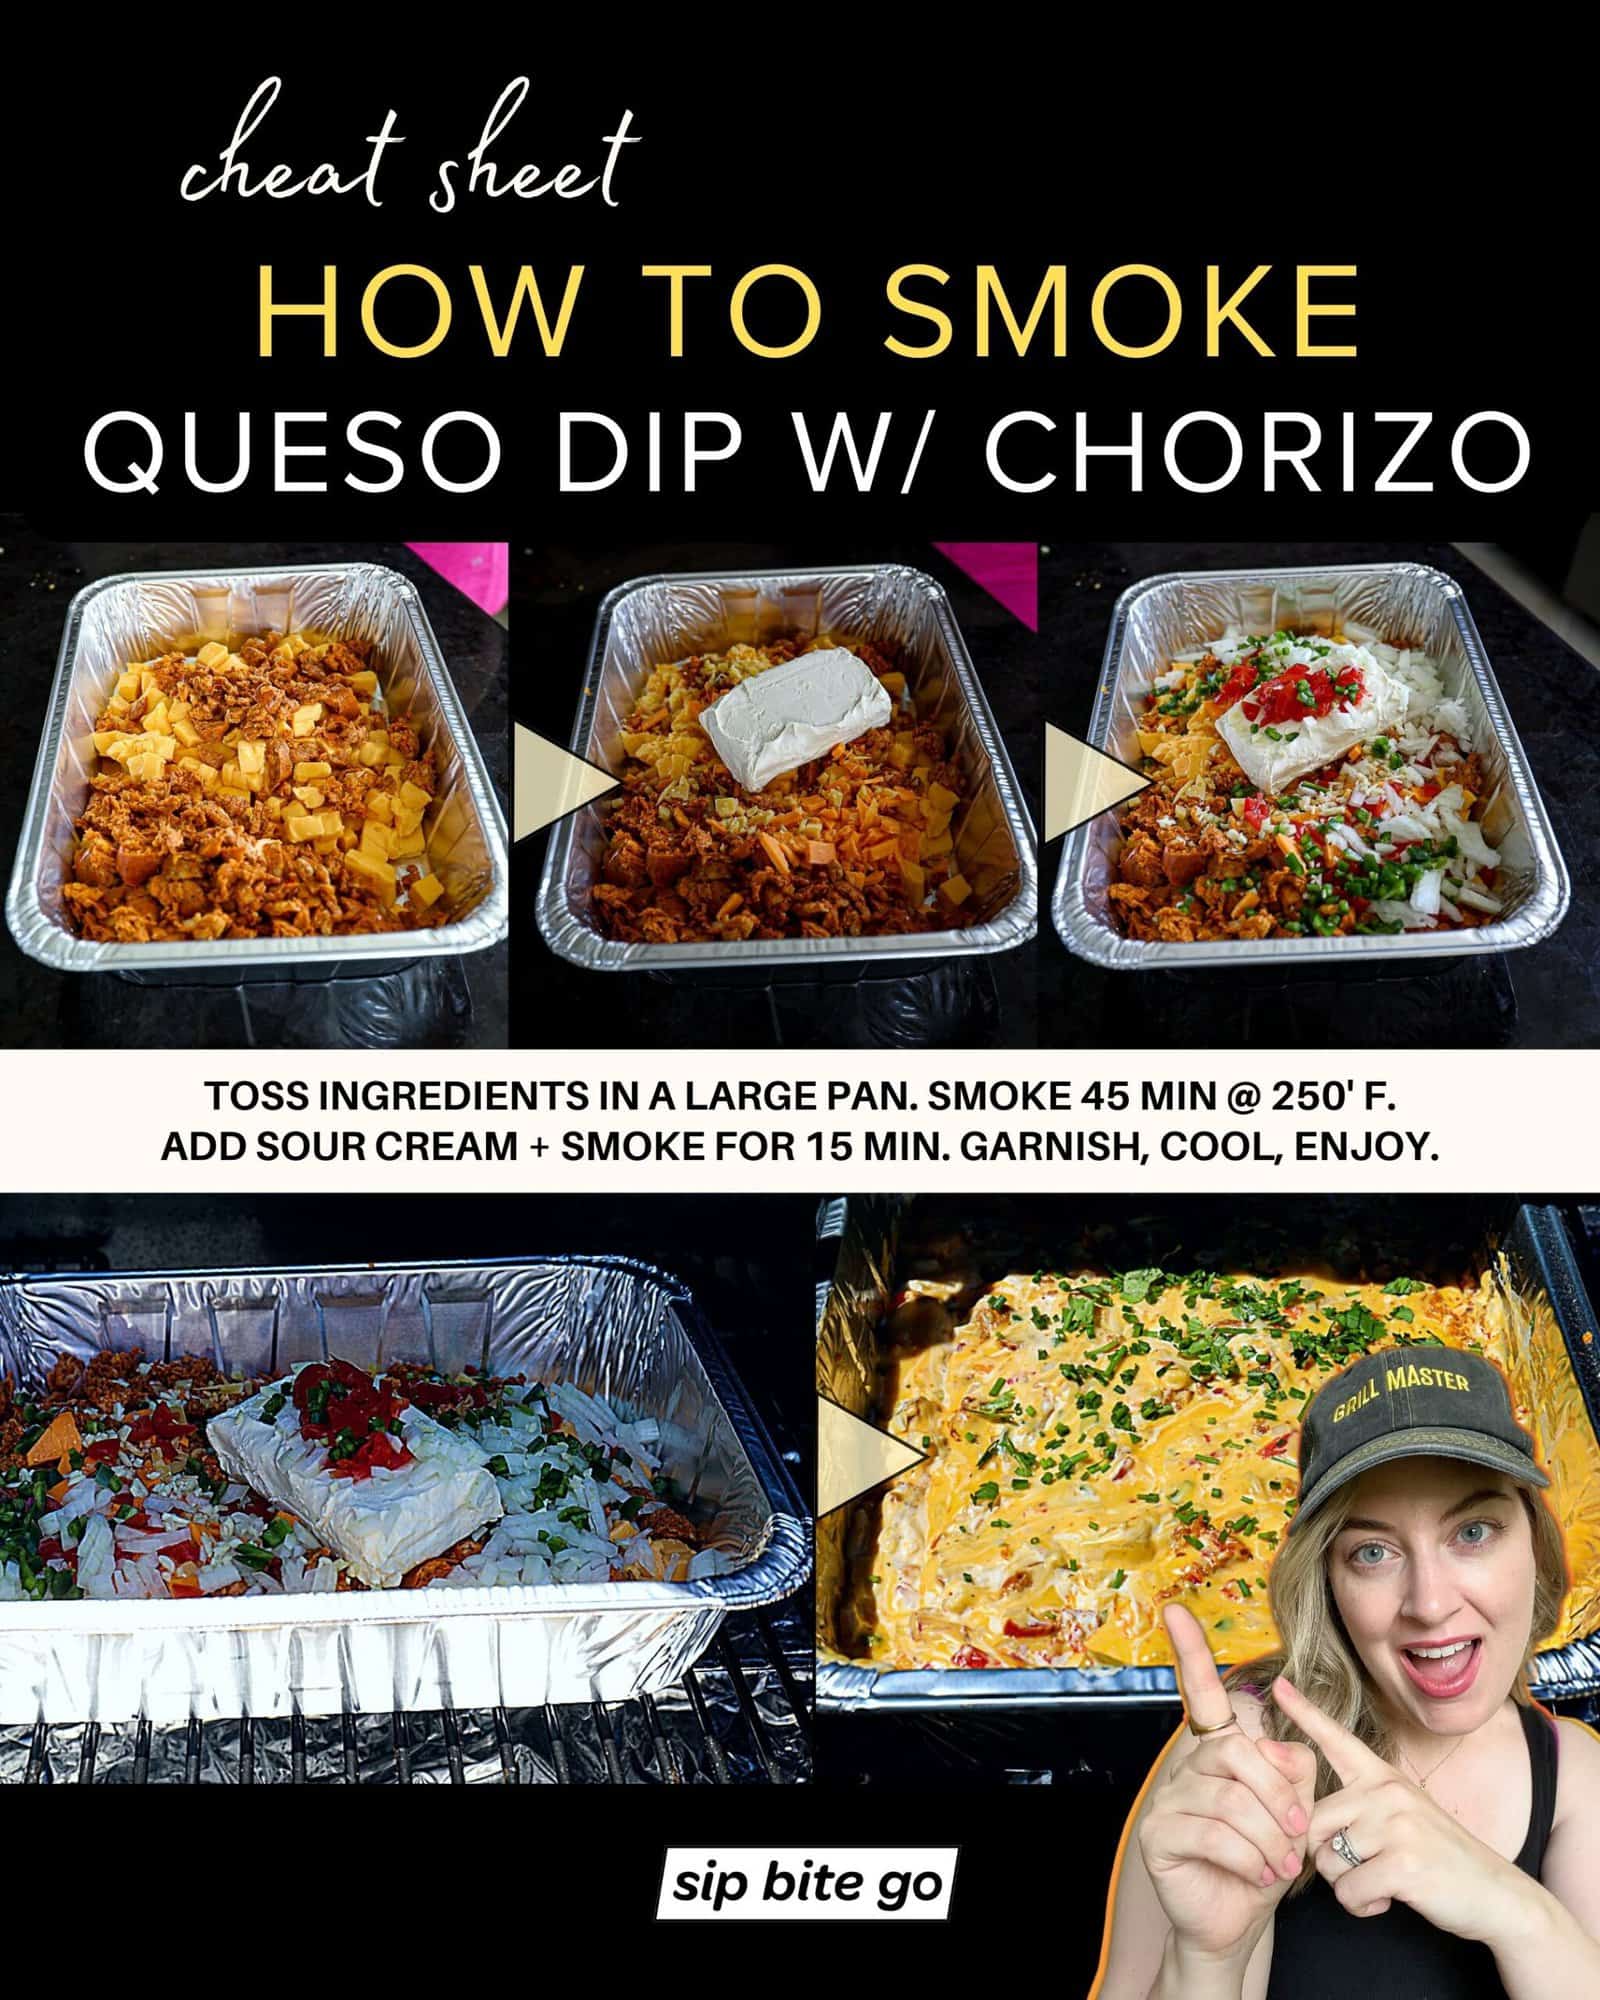 Infographic with recipe images and captions describing how to smoke queso on the Traeger